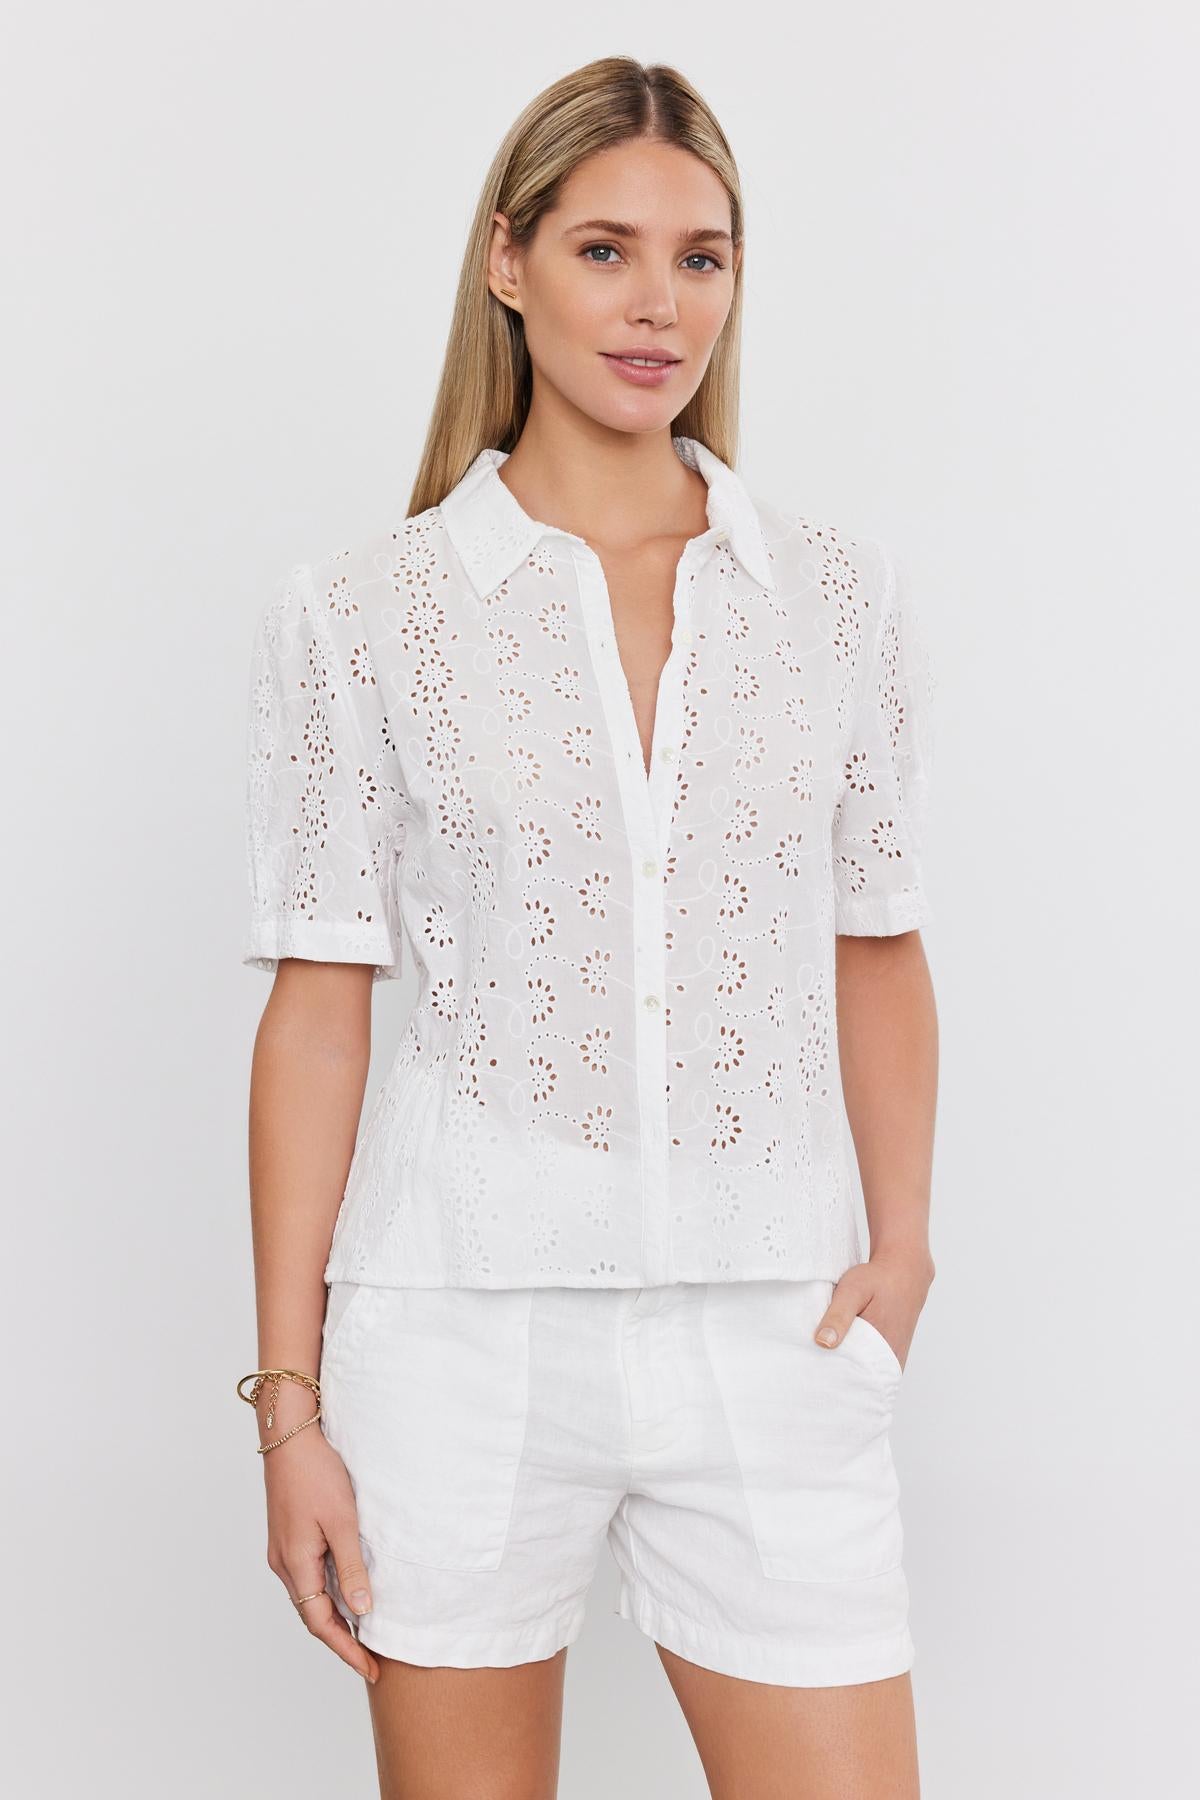   Woman wearing a white cotton OLIVIA BLOUSE with eyelet details and matching shorts standing against a plain background. (Velvet by Graham & Spencer) 